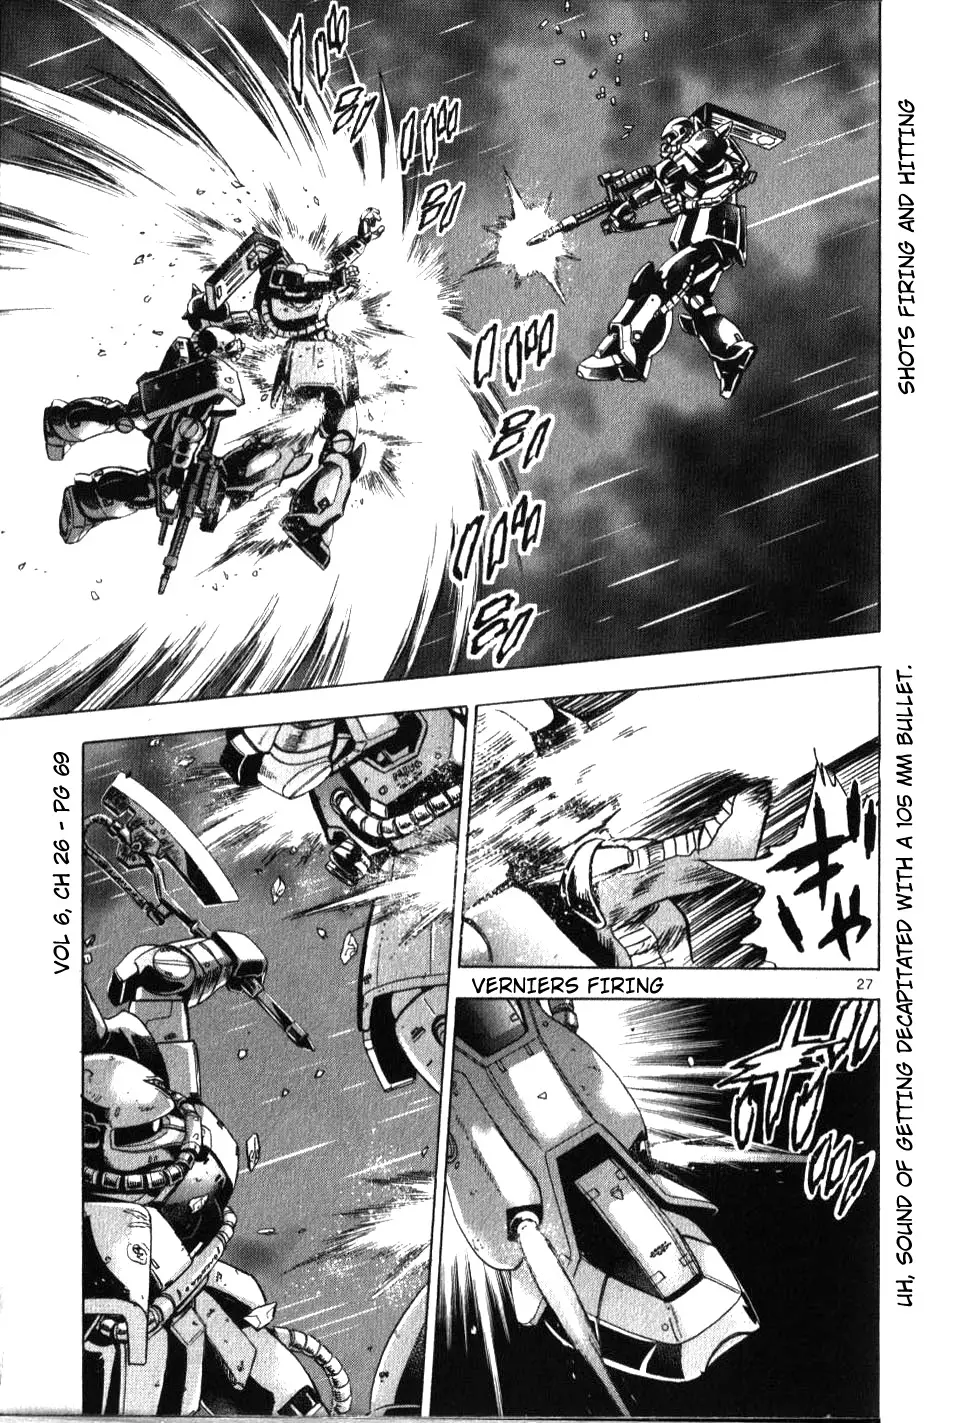 Mobile Suit Gundam Aggressor - 26 page 26-736dfcf5